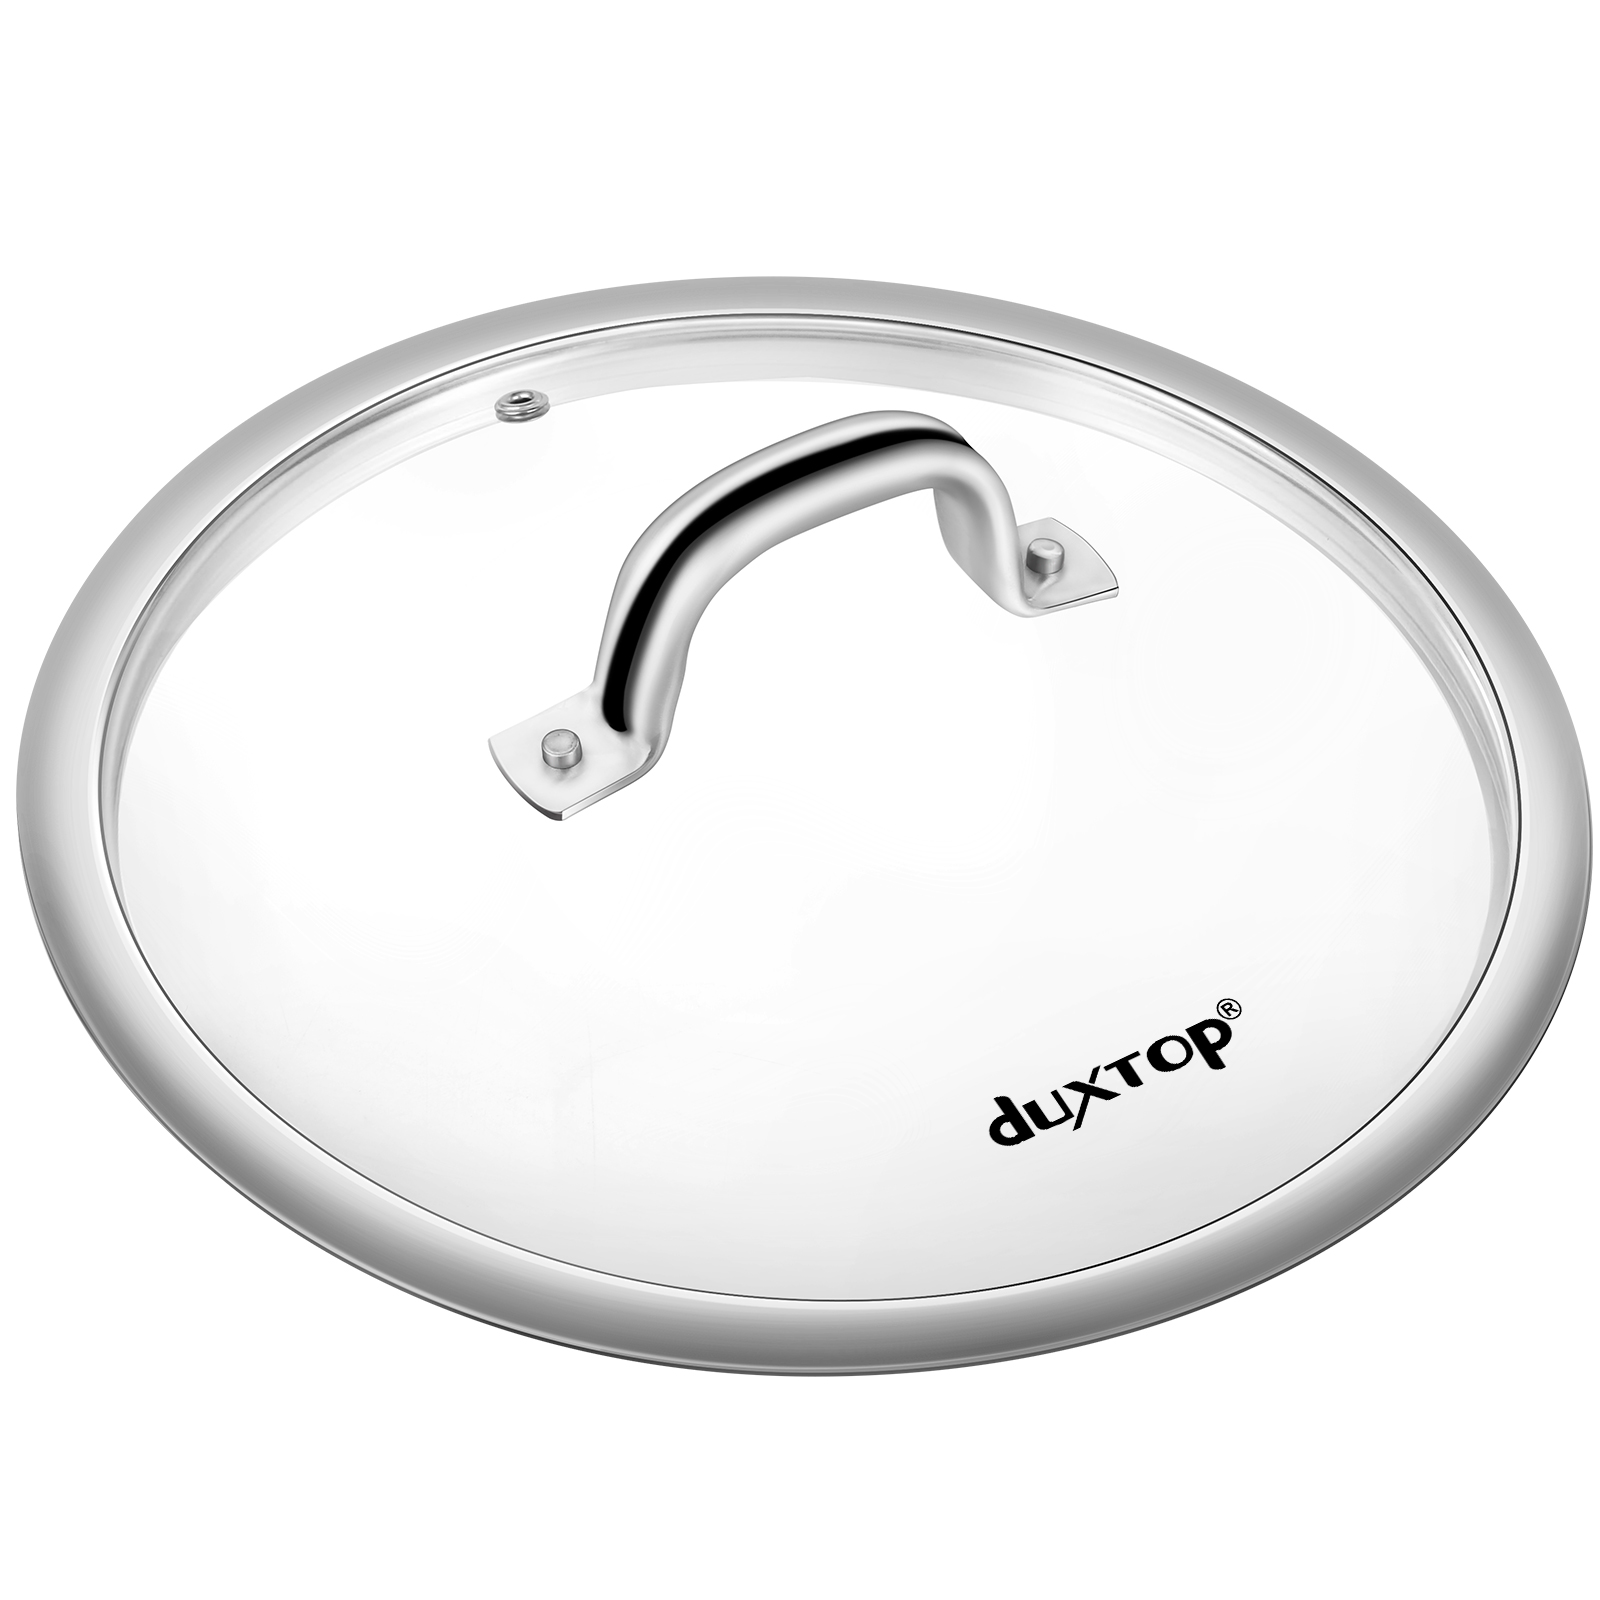 Duxtop Cookware Glass Replacement Lid (6 Inches) - The Secura